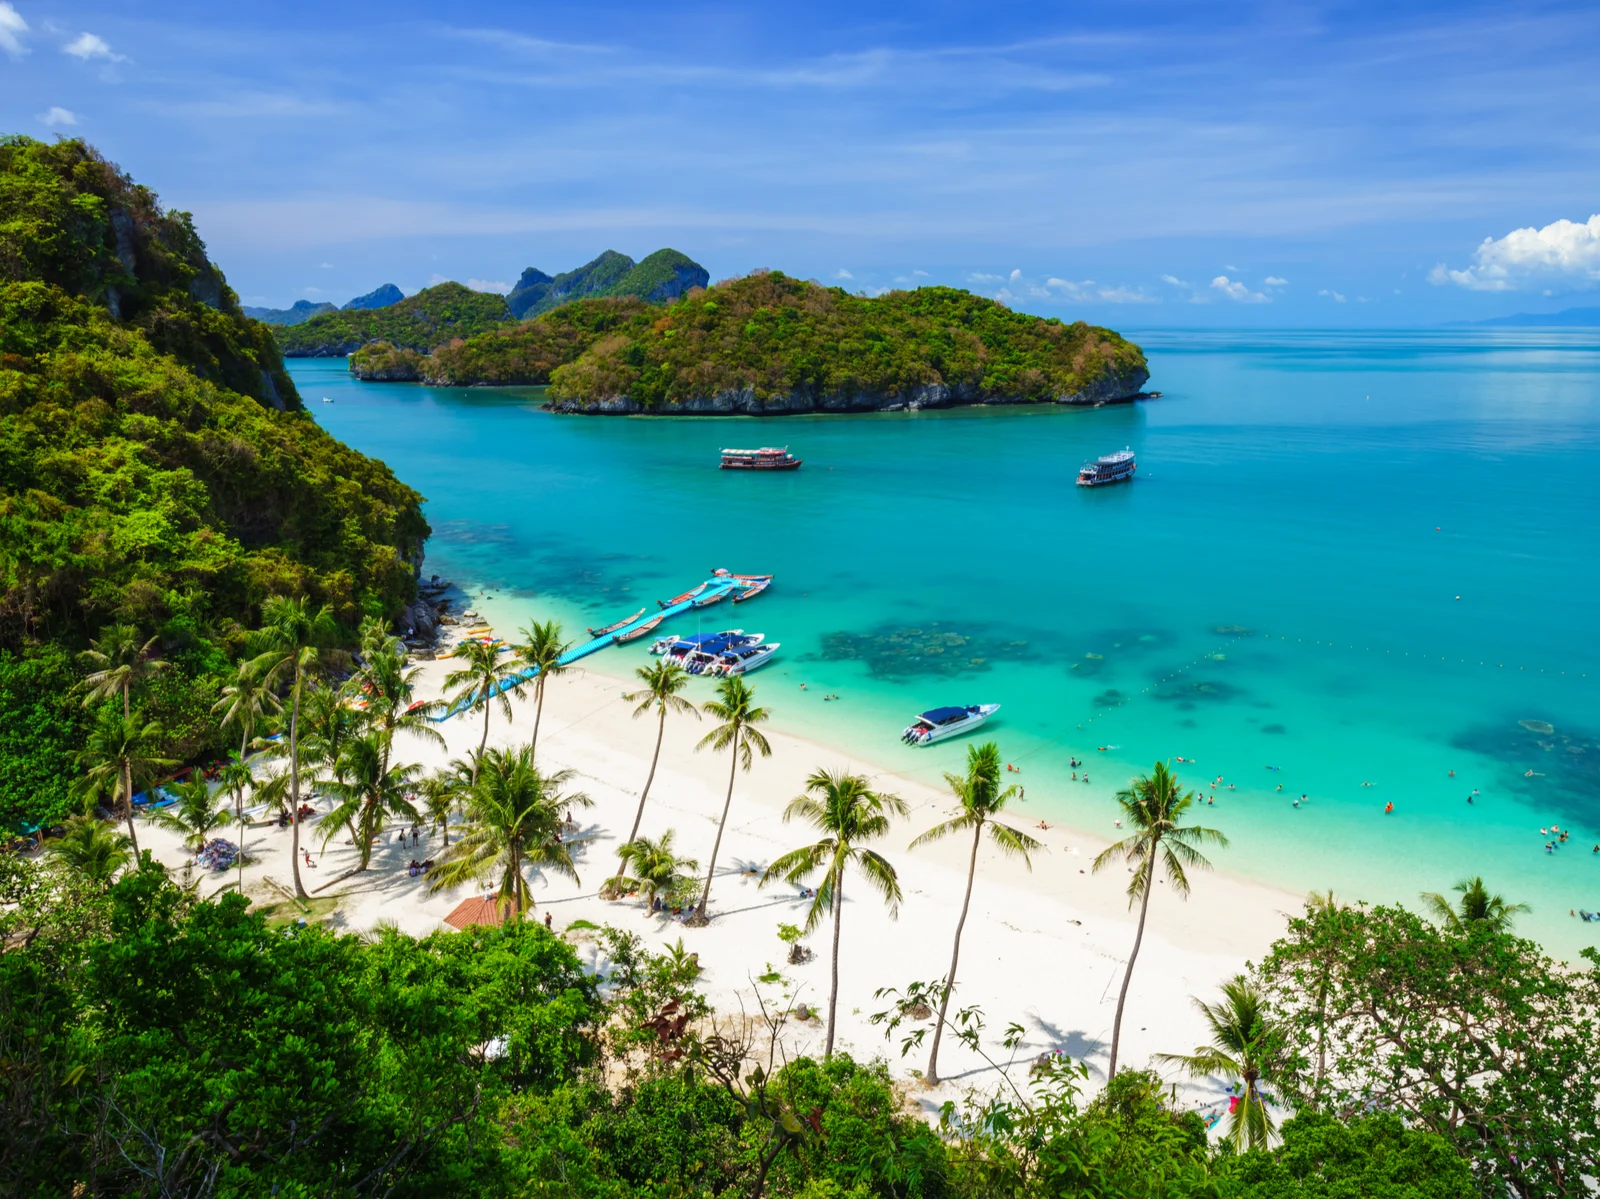 Koh Samui, Thailand, one of the world's best island vacations, pictured from the top of a lookout point